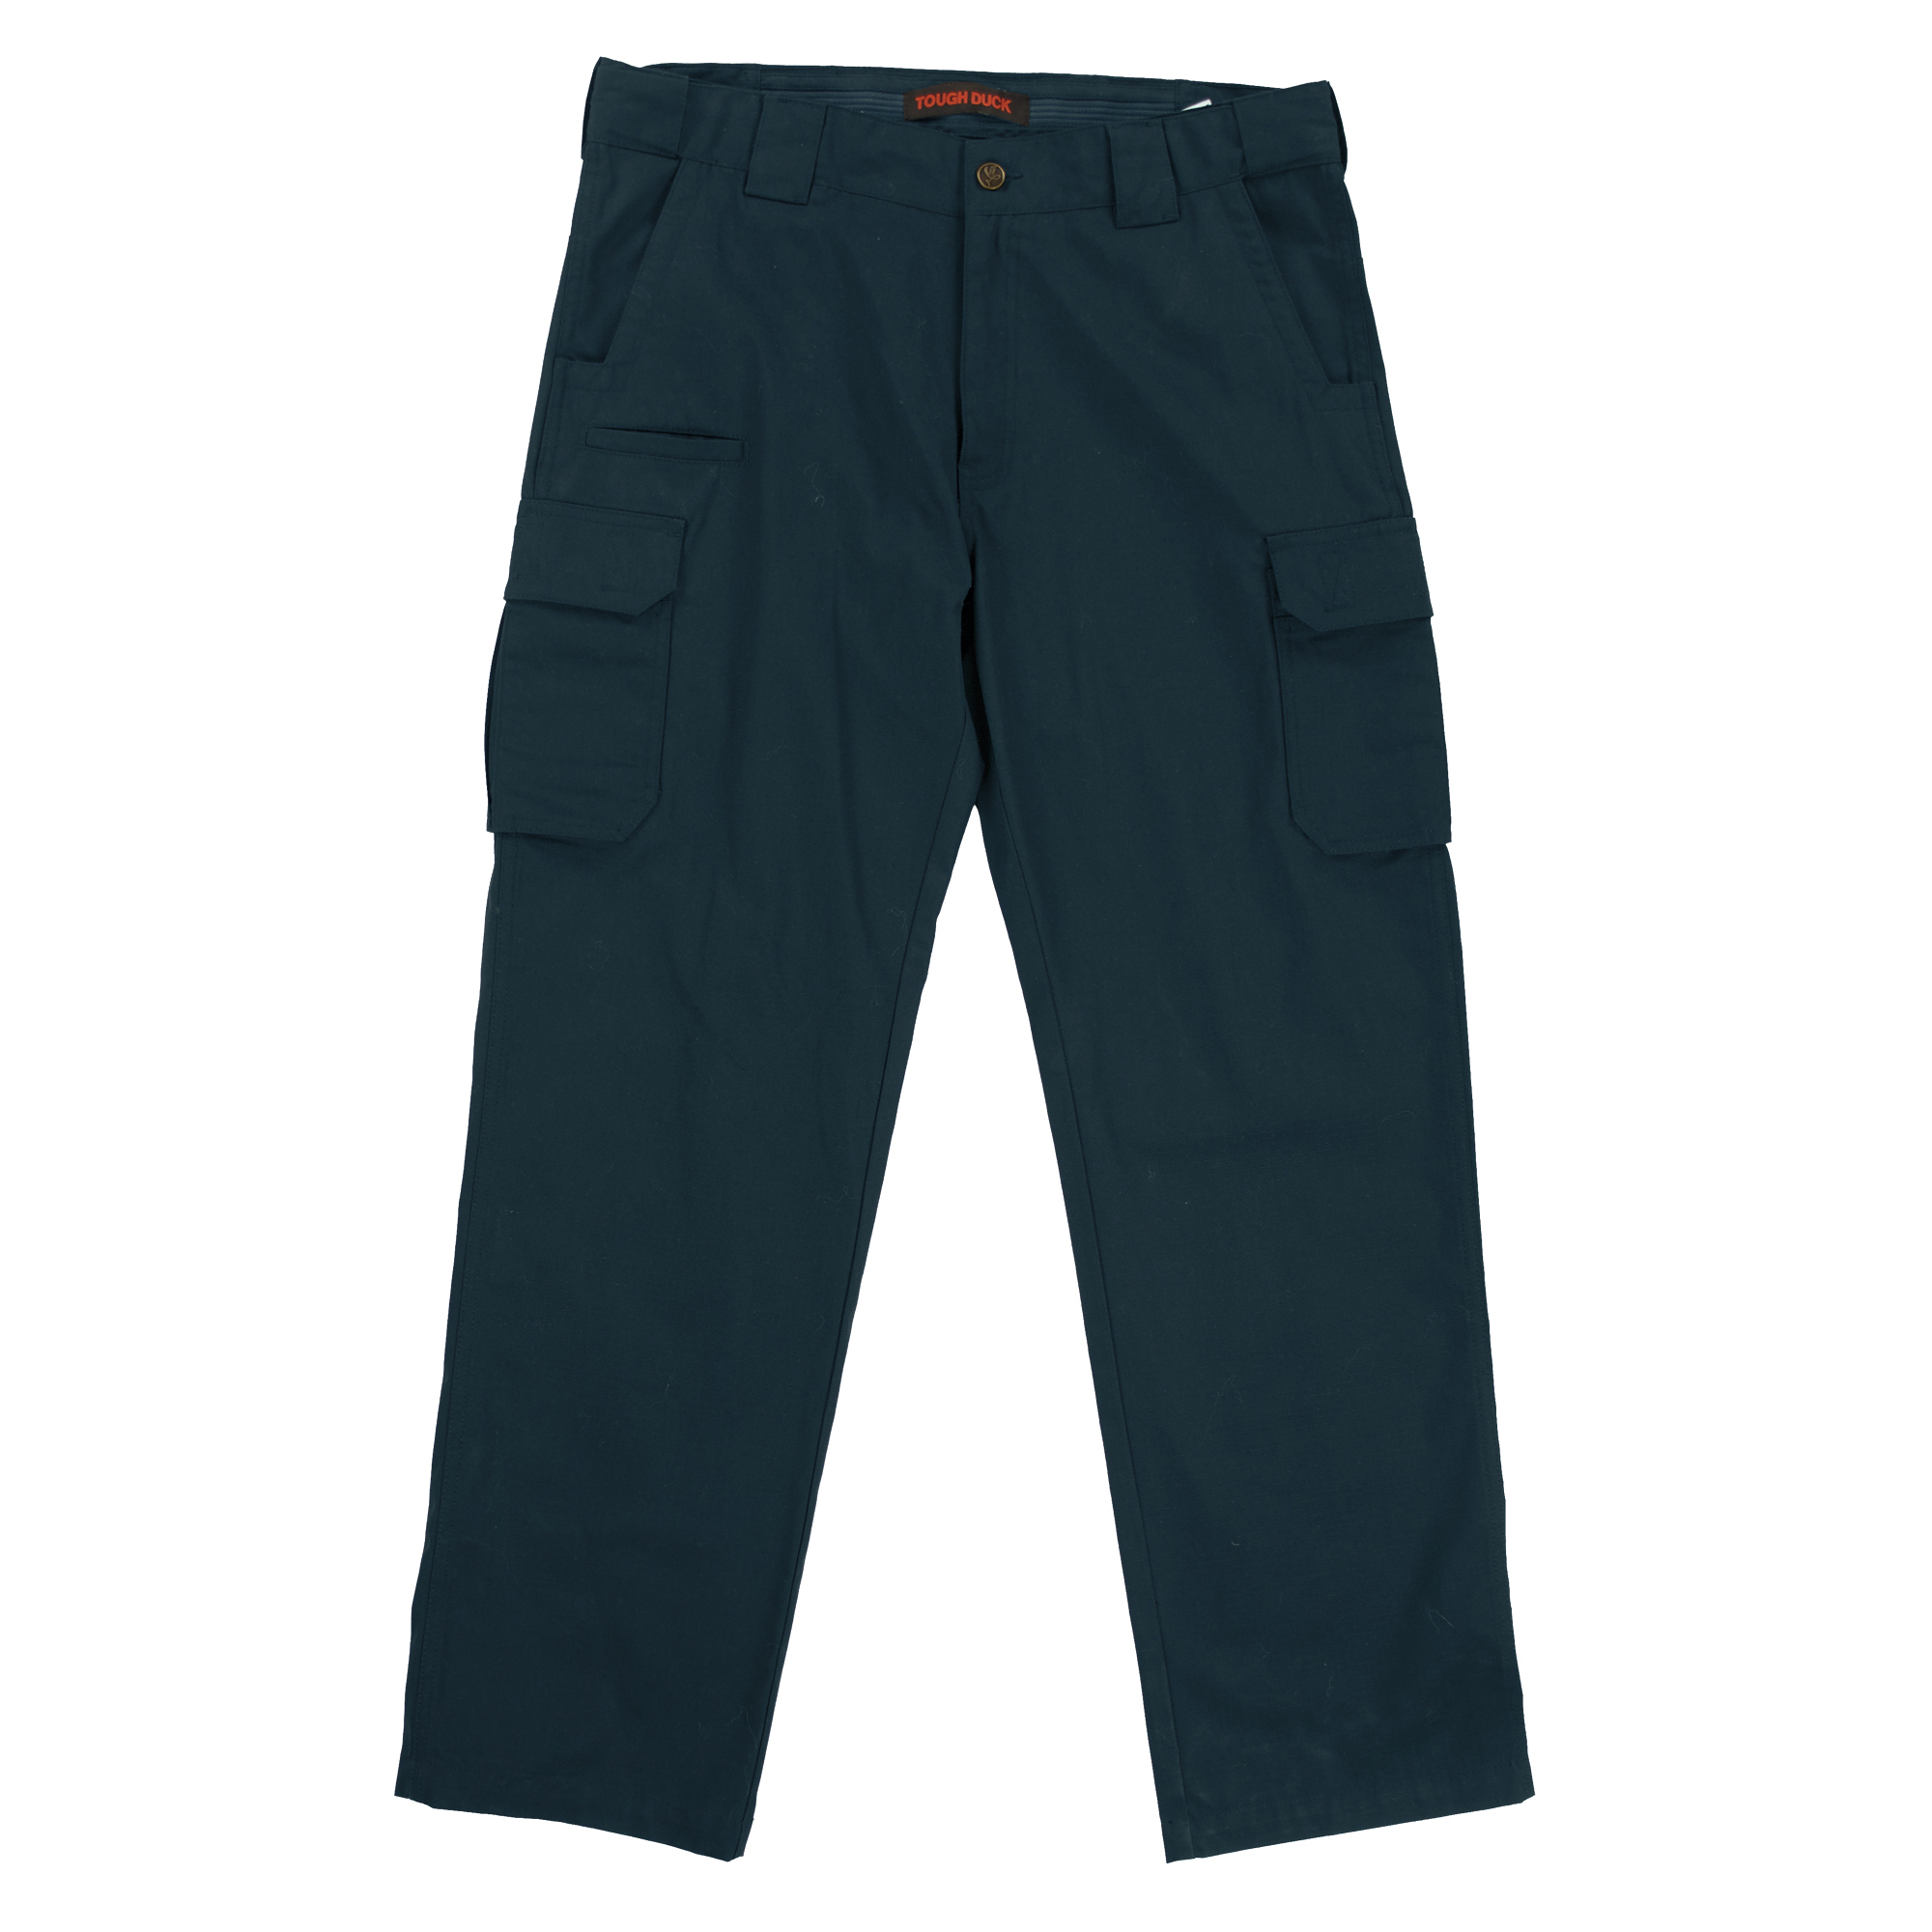 Tough Duck, Ripstop Cargo Pant, Waist 44 in, Inseam 34 in, Color Navy, Model WP113